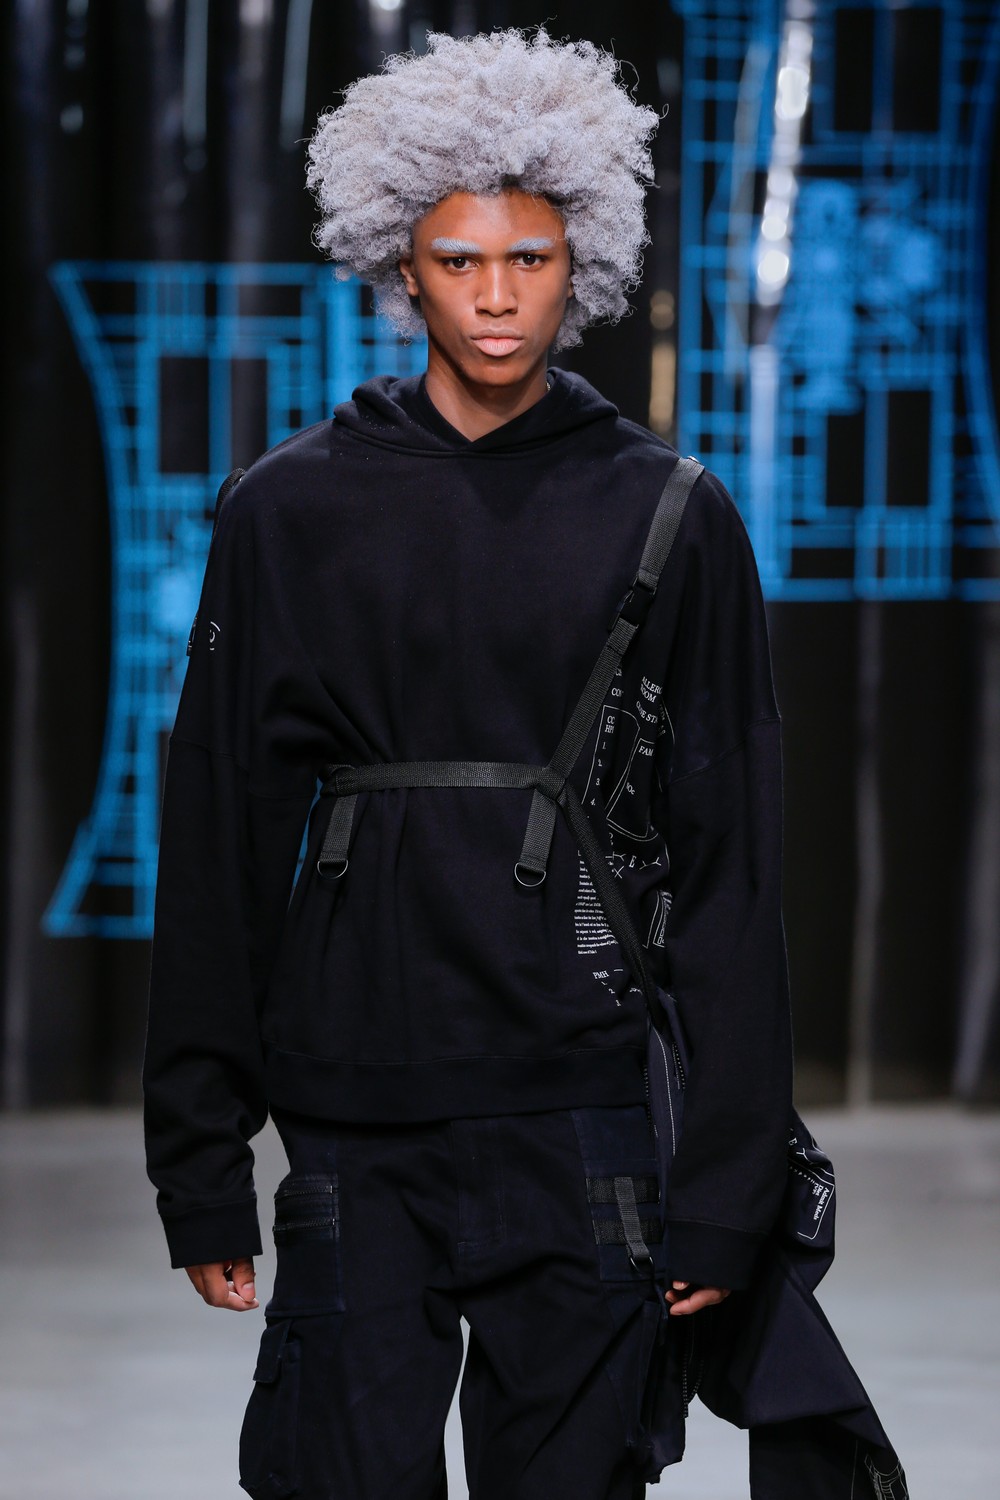 C2H4 Shows Collection of Futuristic Workwear Featuring Kappa Collabo